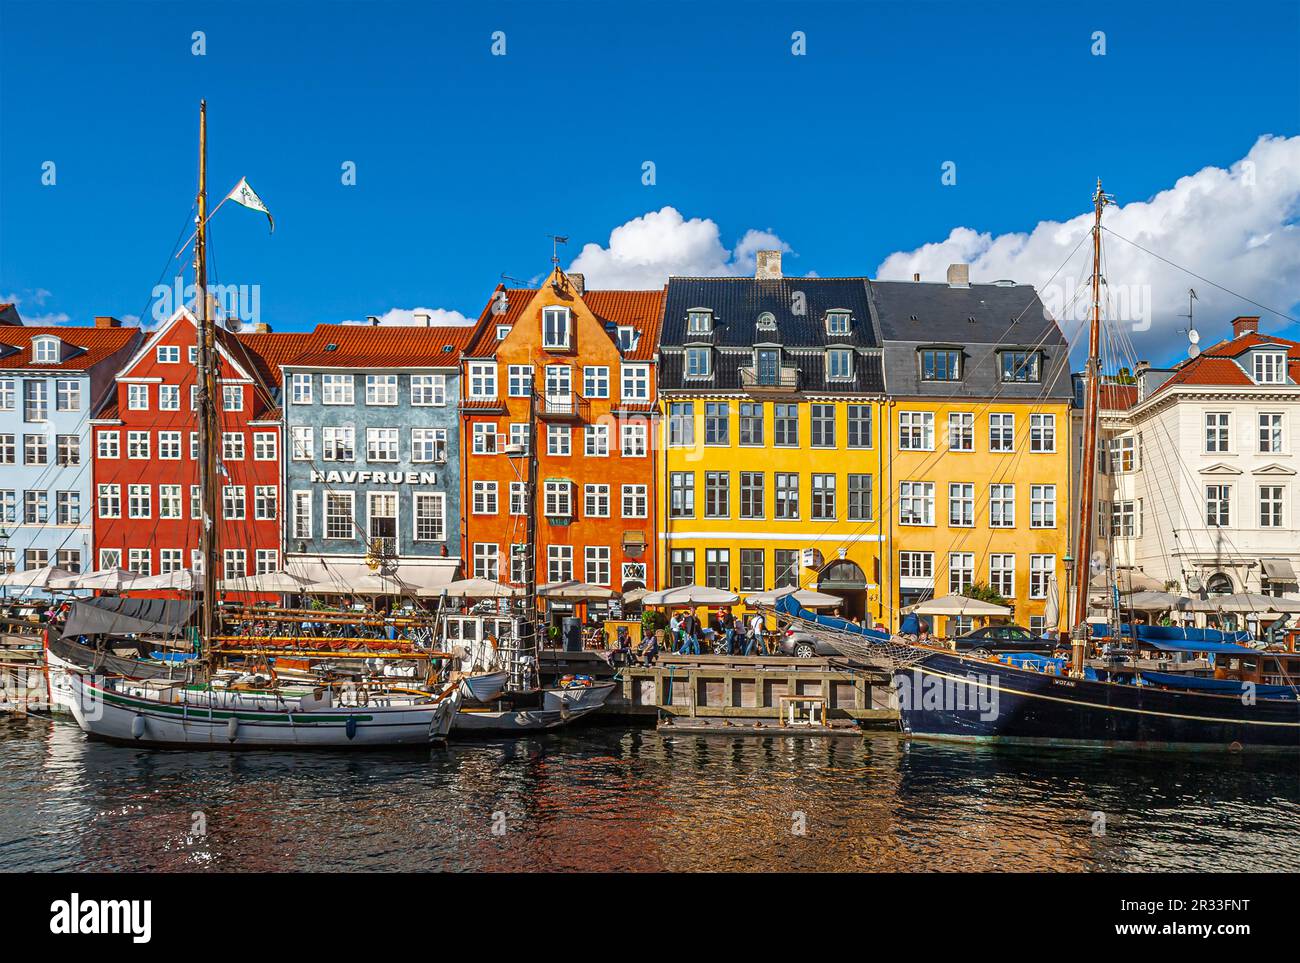 Copenhagen, Denmark - September 13, 2010: Line of iconic Nyhavn restaurant facades in bright colors at Nyhavnsbroen under blue cloudscape. Boats on wa Stock Photo